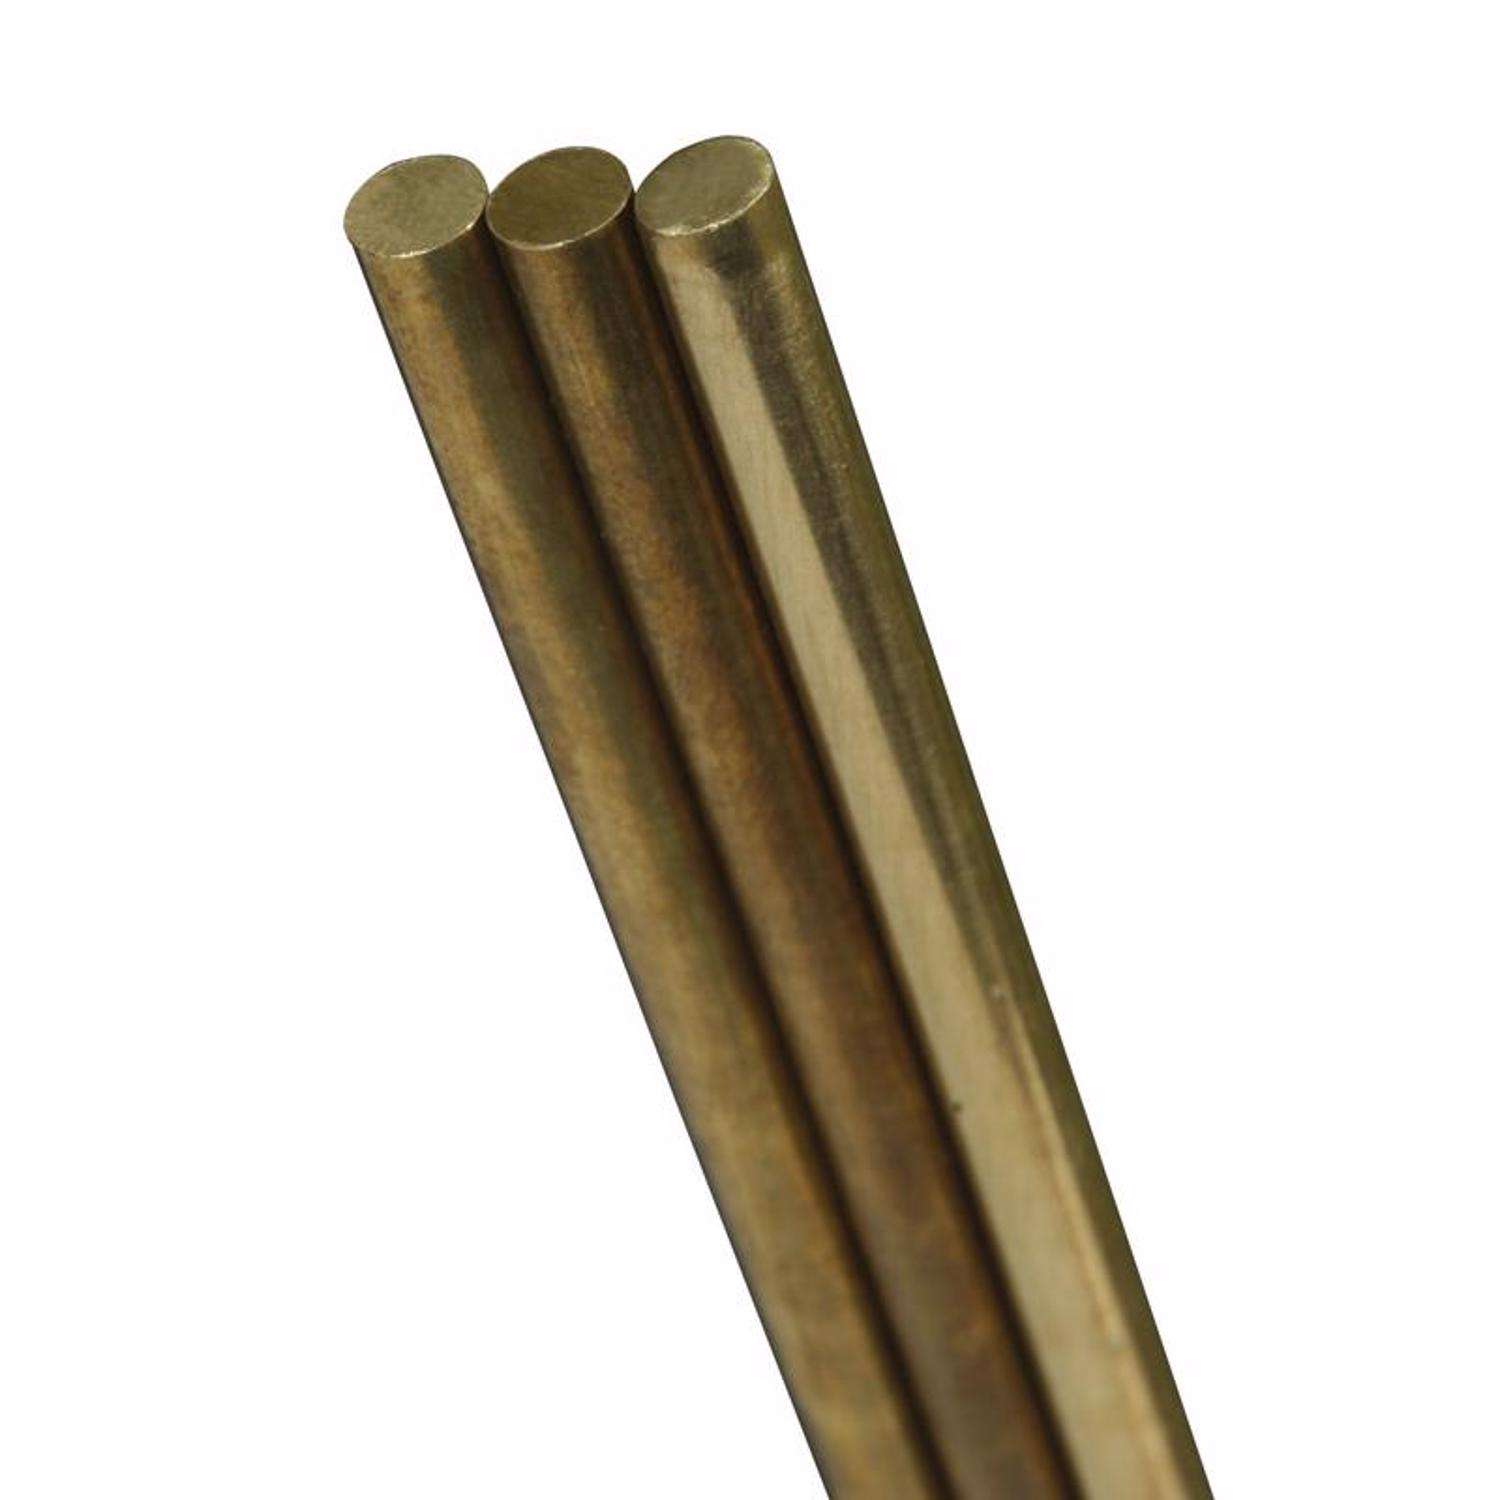 Metal Products in the Factory Scrap Brass Rods Rejects. Stock